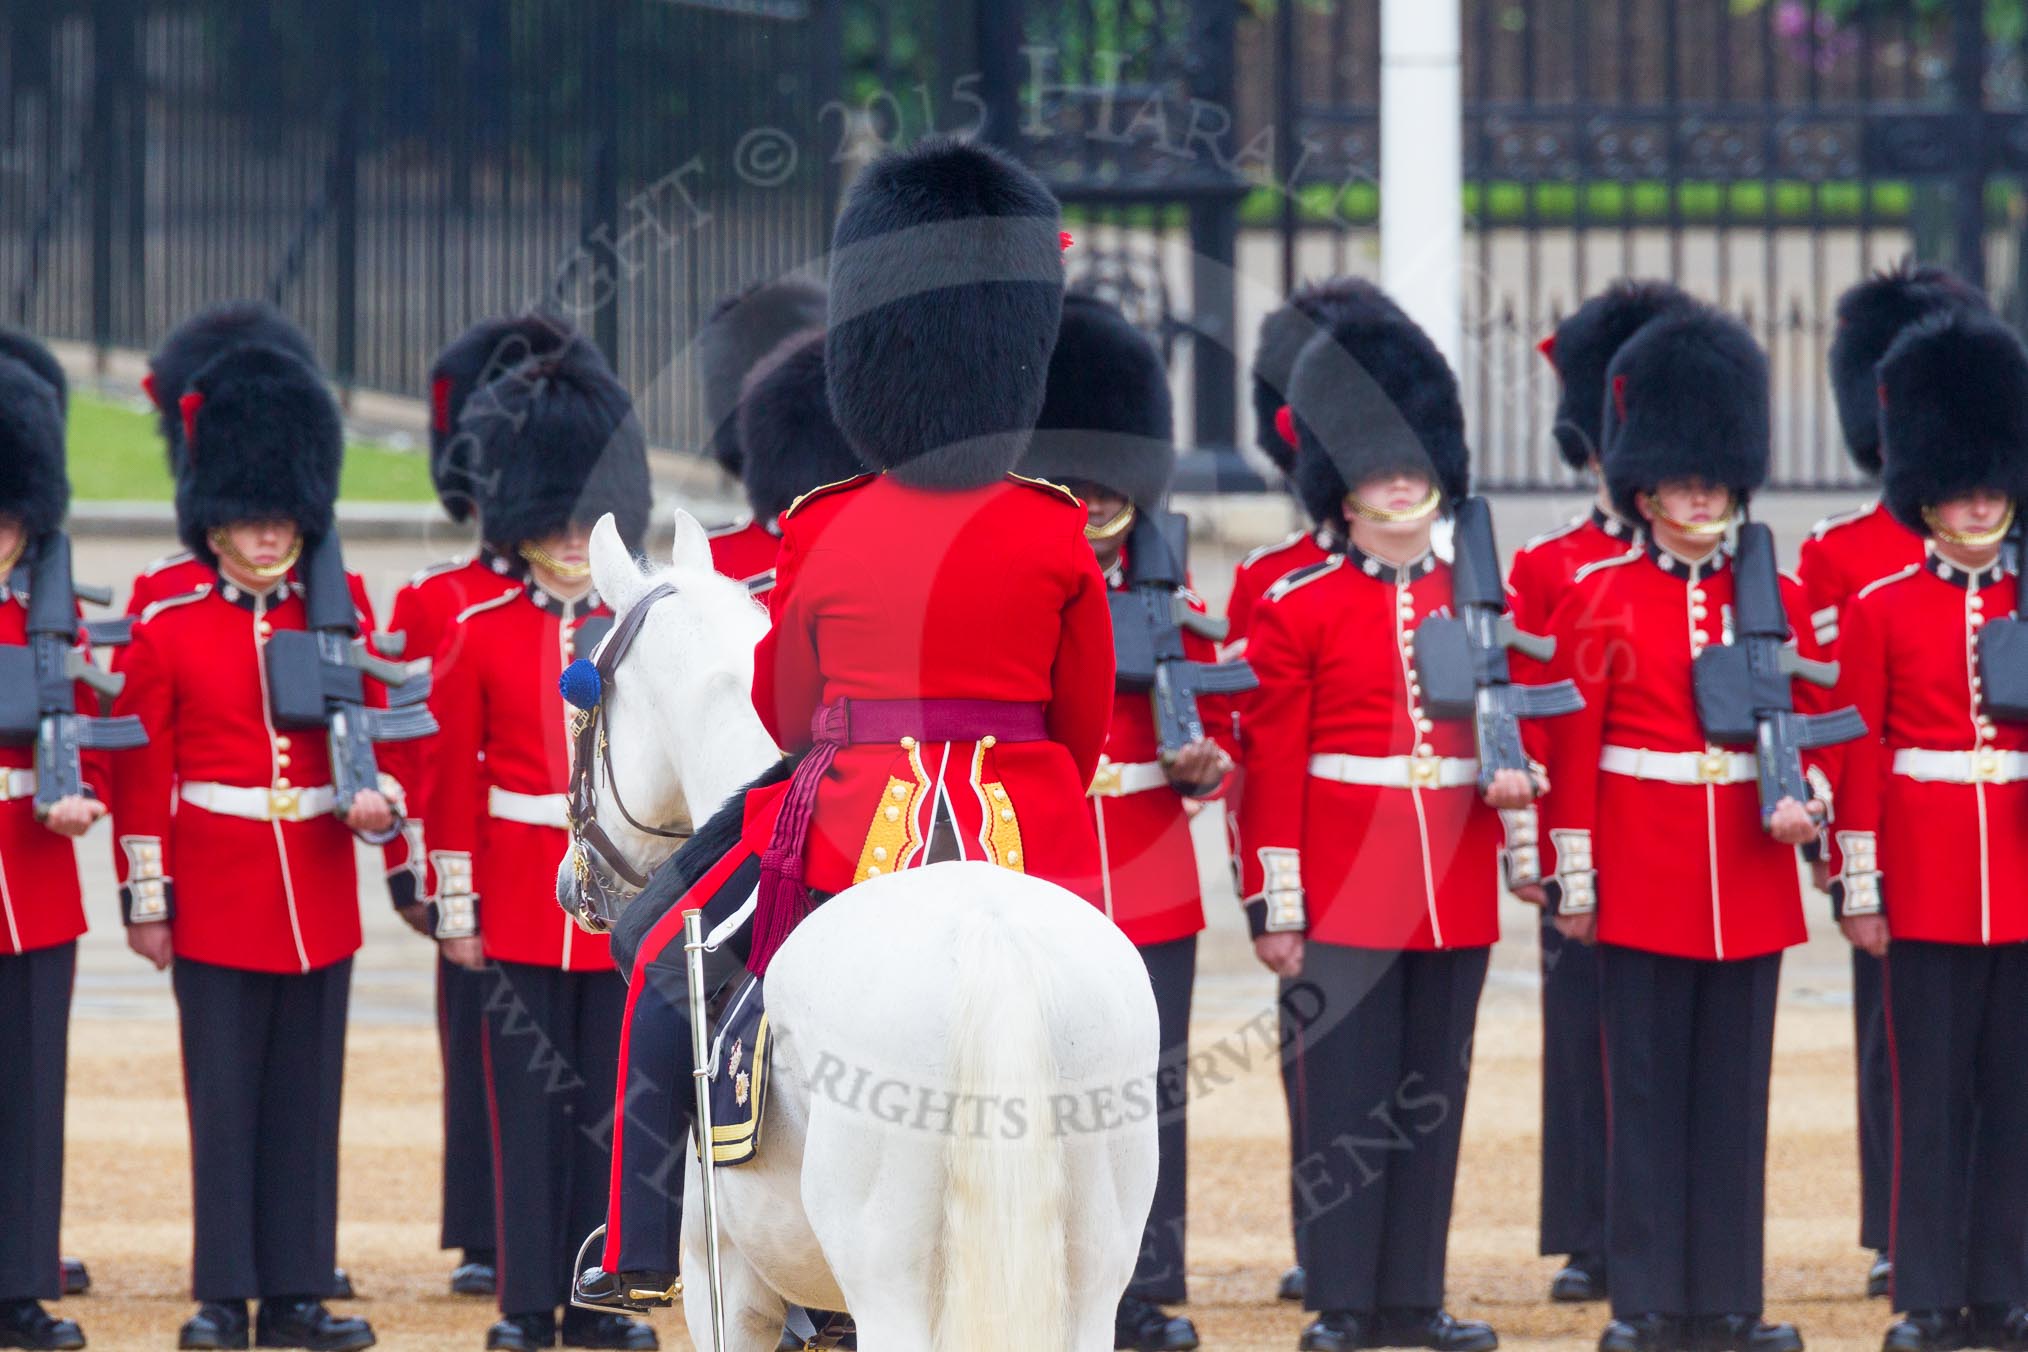 The Colonel's Review 2016.
Horse Guards Parade, Westminster,
London,

United Kingdom,
on 04 June 2016 at 10:42, image #117